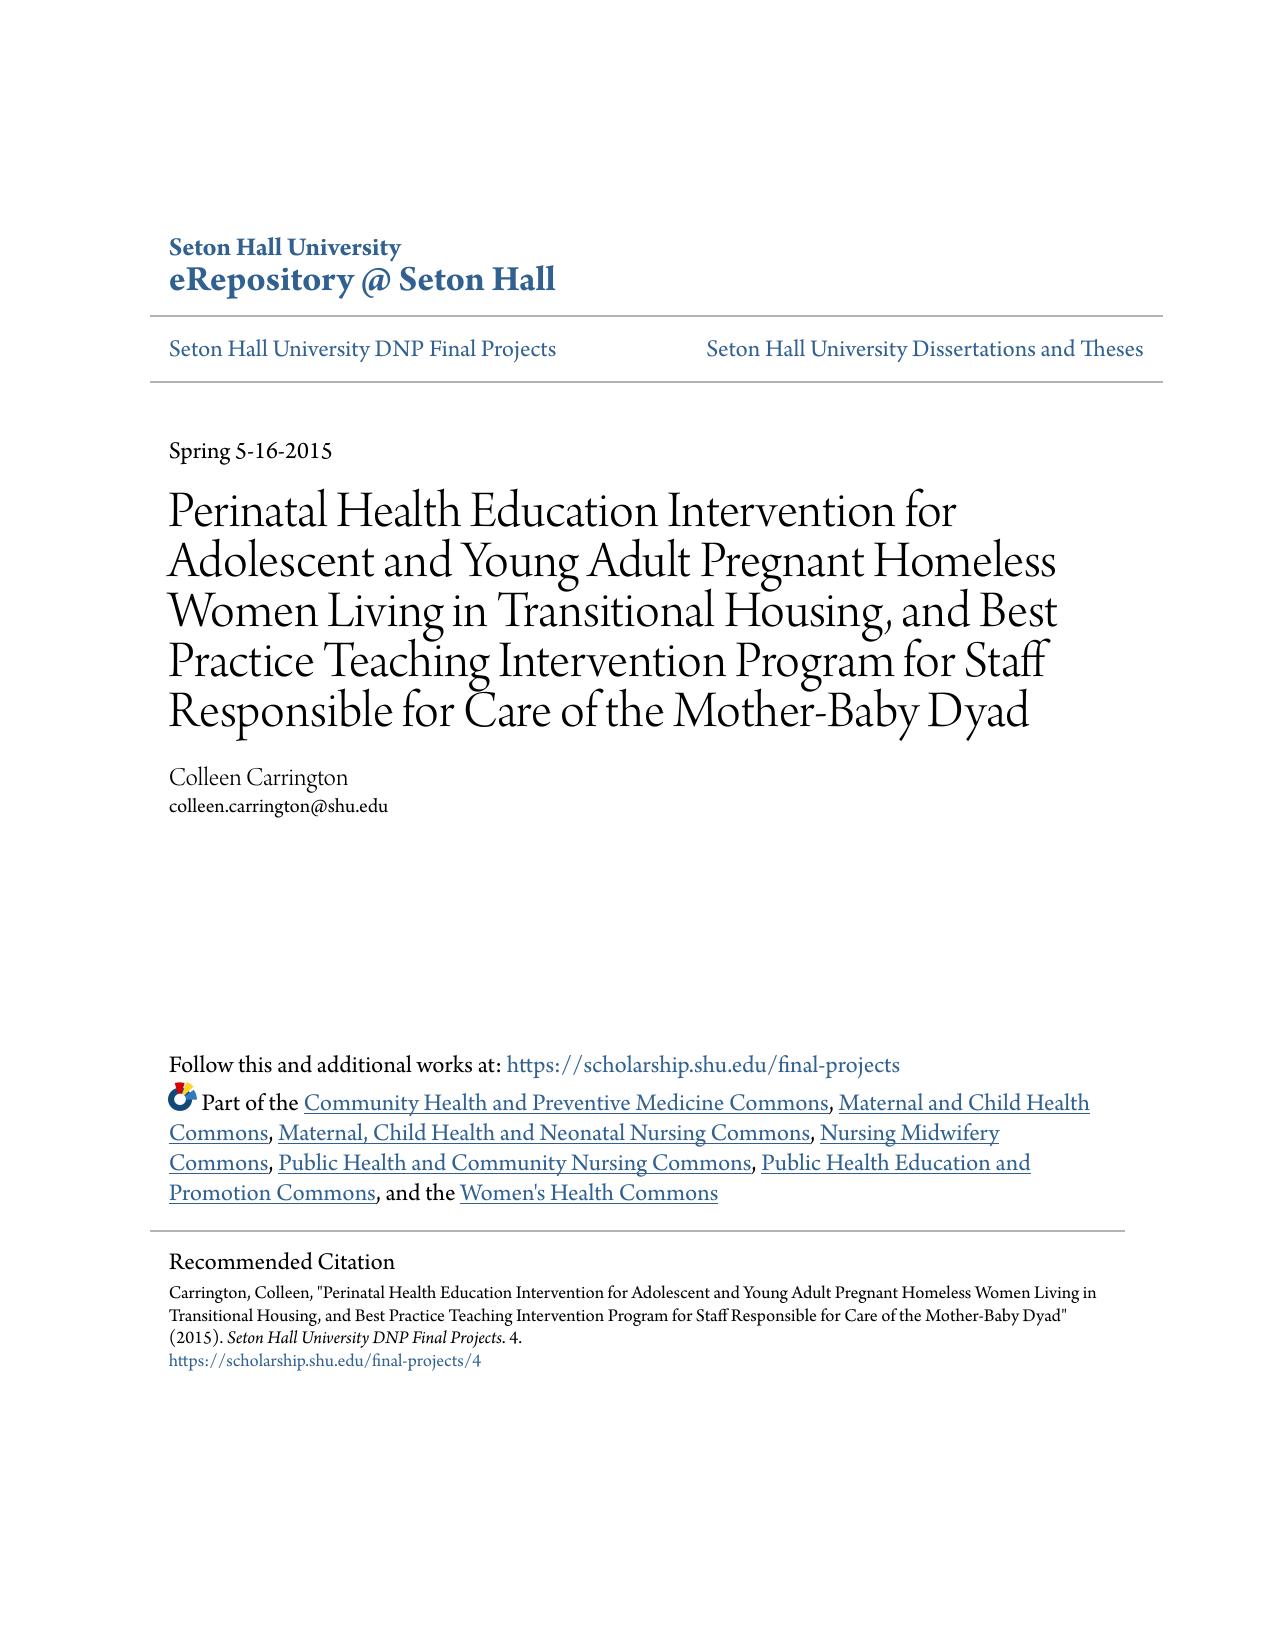 Perinatal Health Education Intervention for Adolescent and Young Adult Pregnant Homeless Women Living in Transitional Housing, and Best Practice Teaching Intervention Program for Staff Responsible for Care of the Mother-Baby Dyad